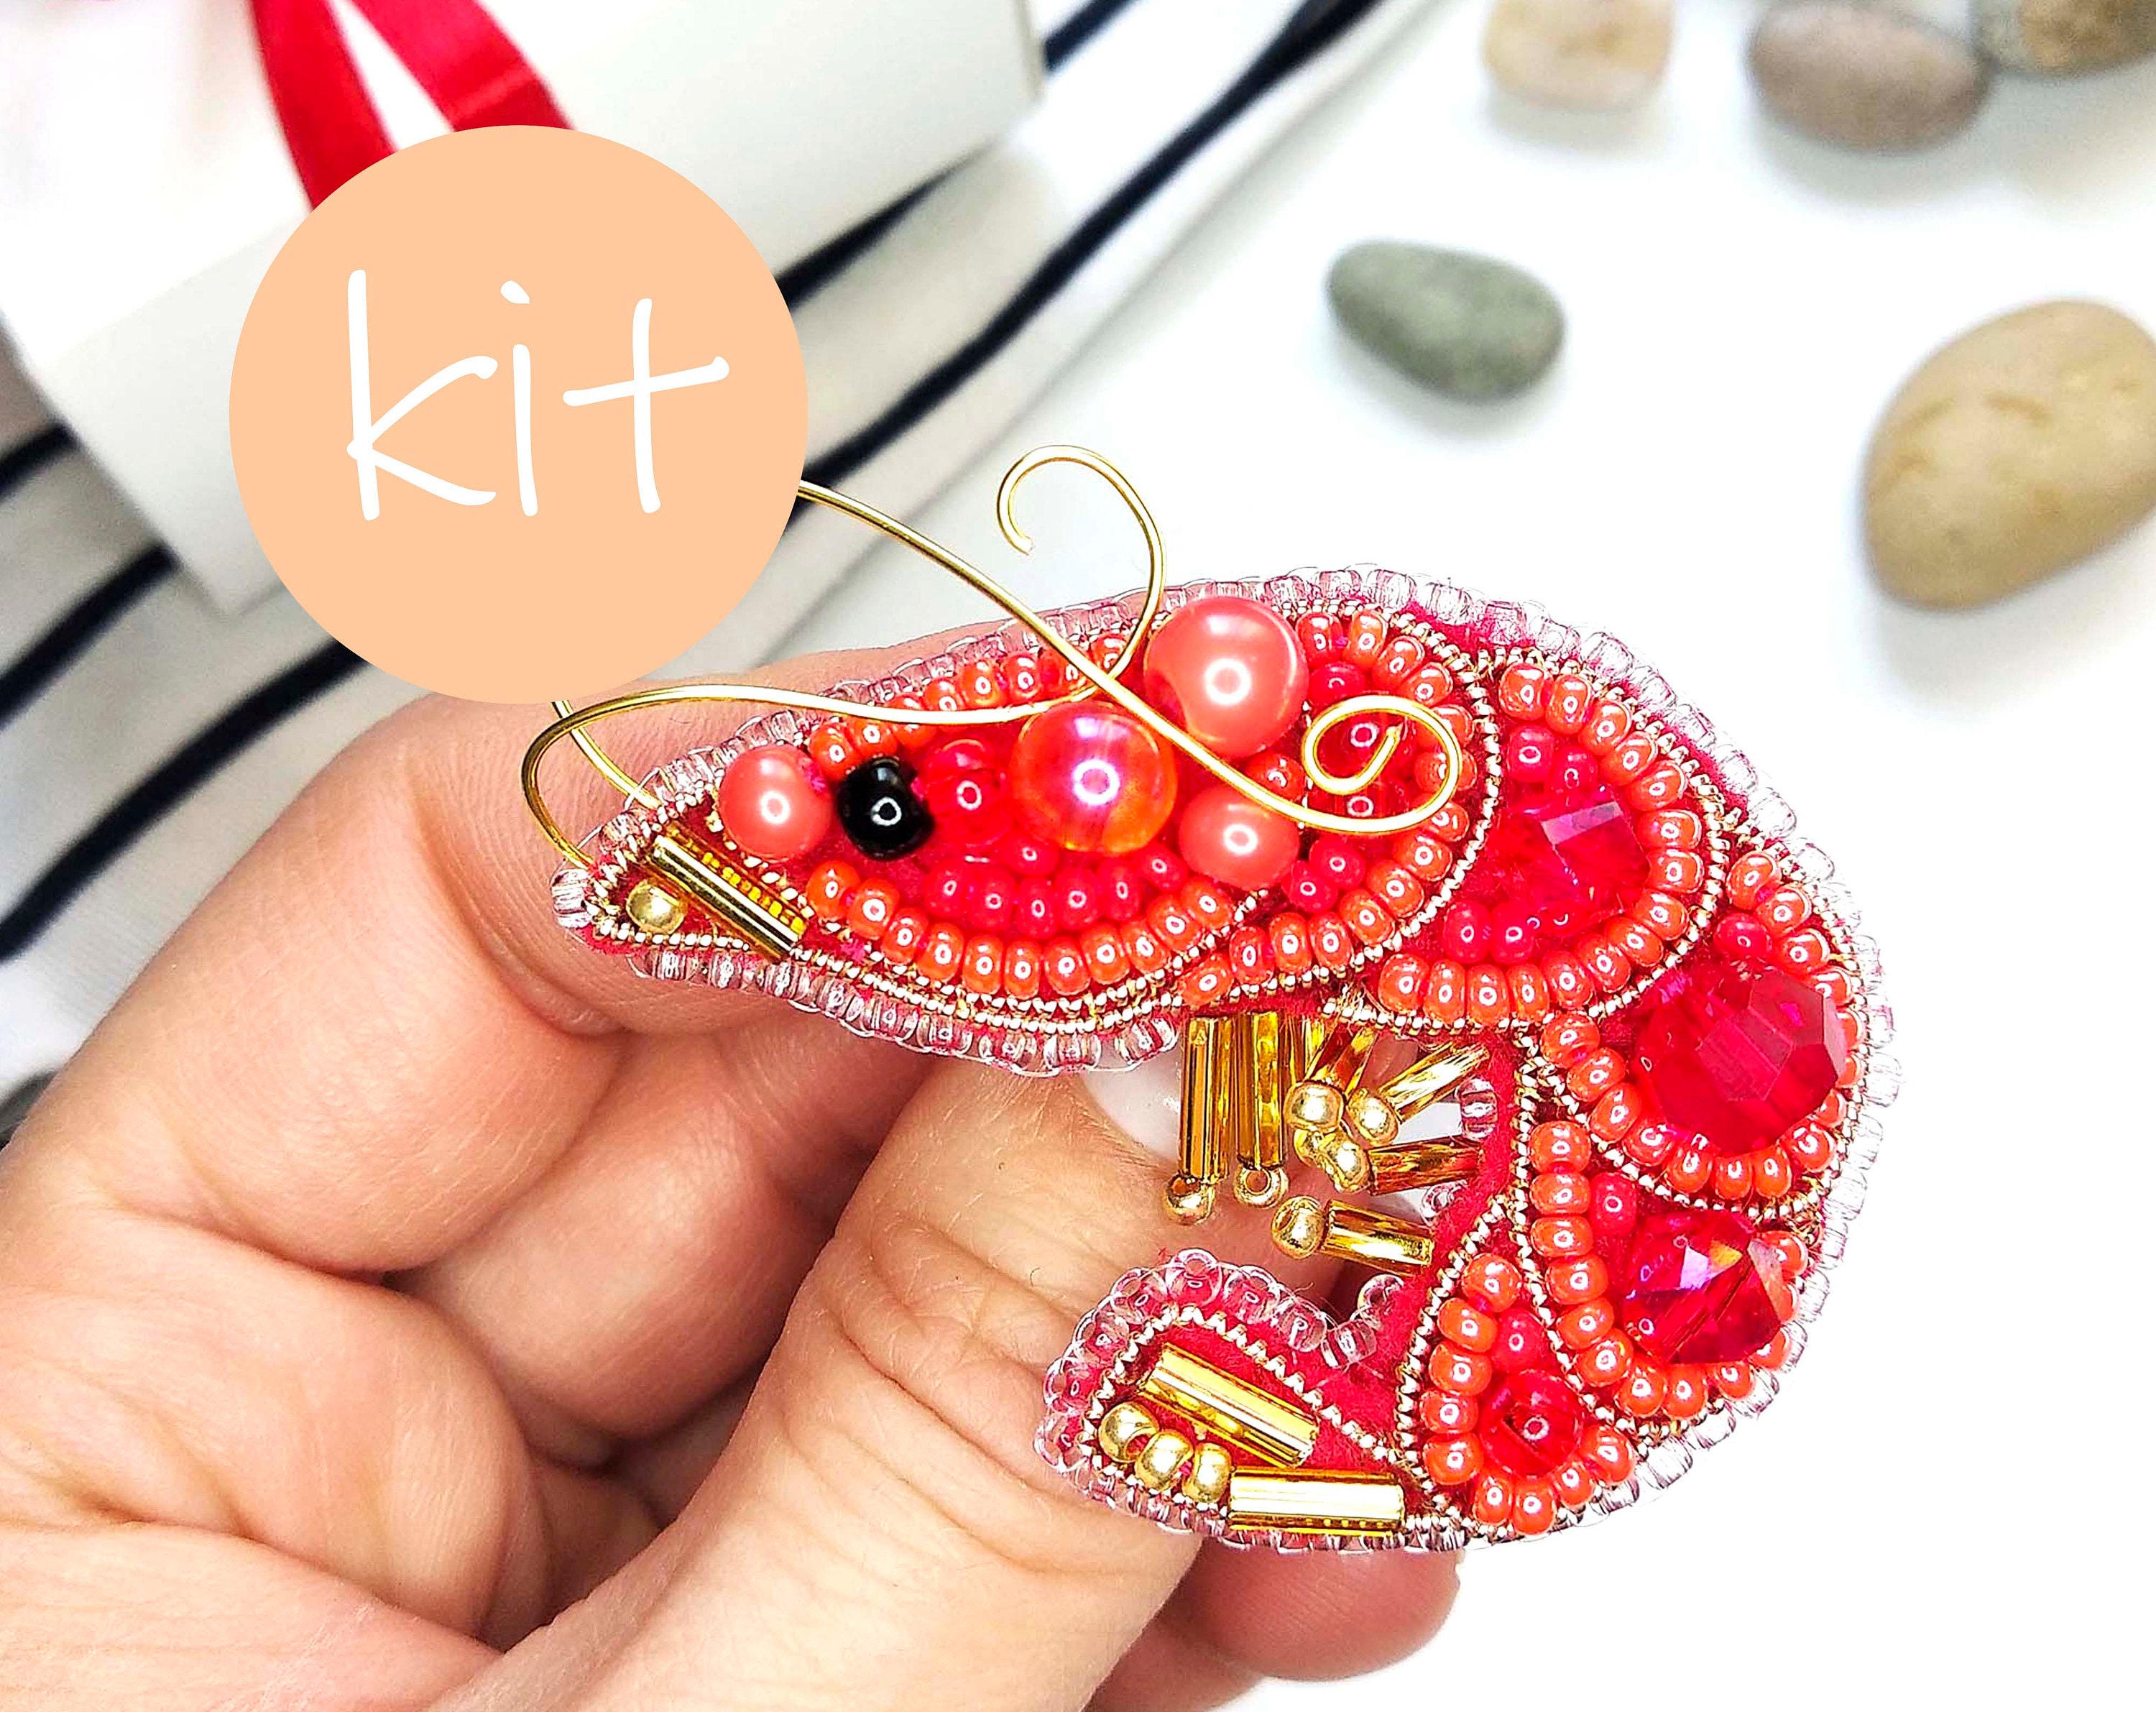 10 Pieces of Shrimp Resin Charms for Jewelry Making